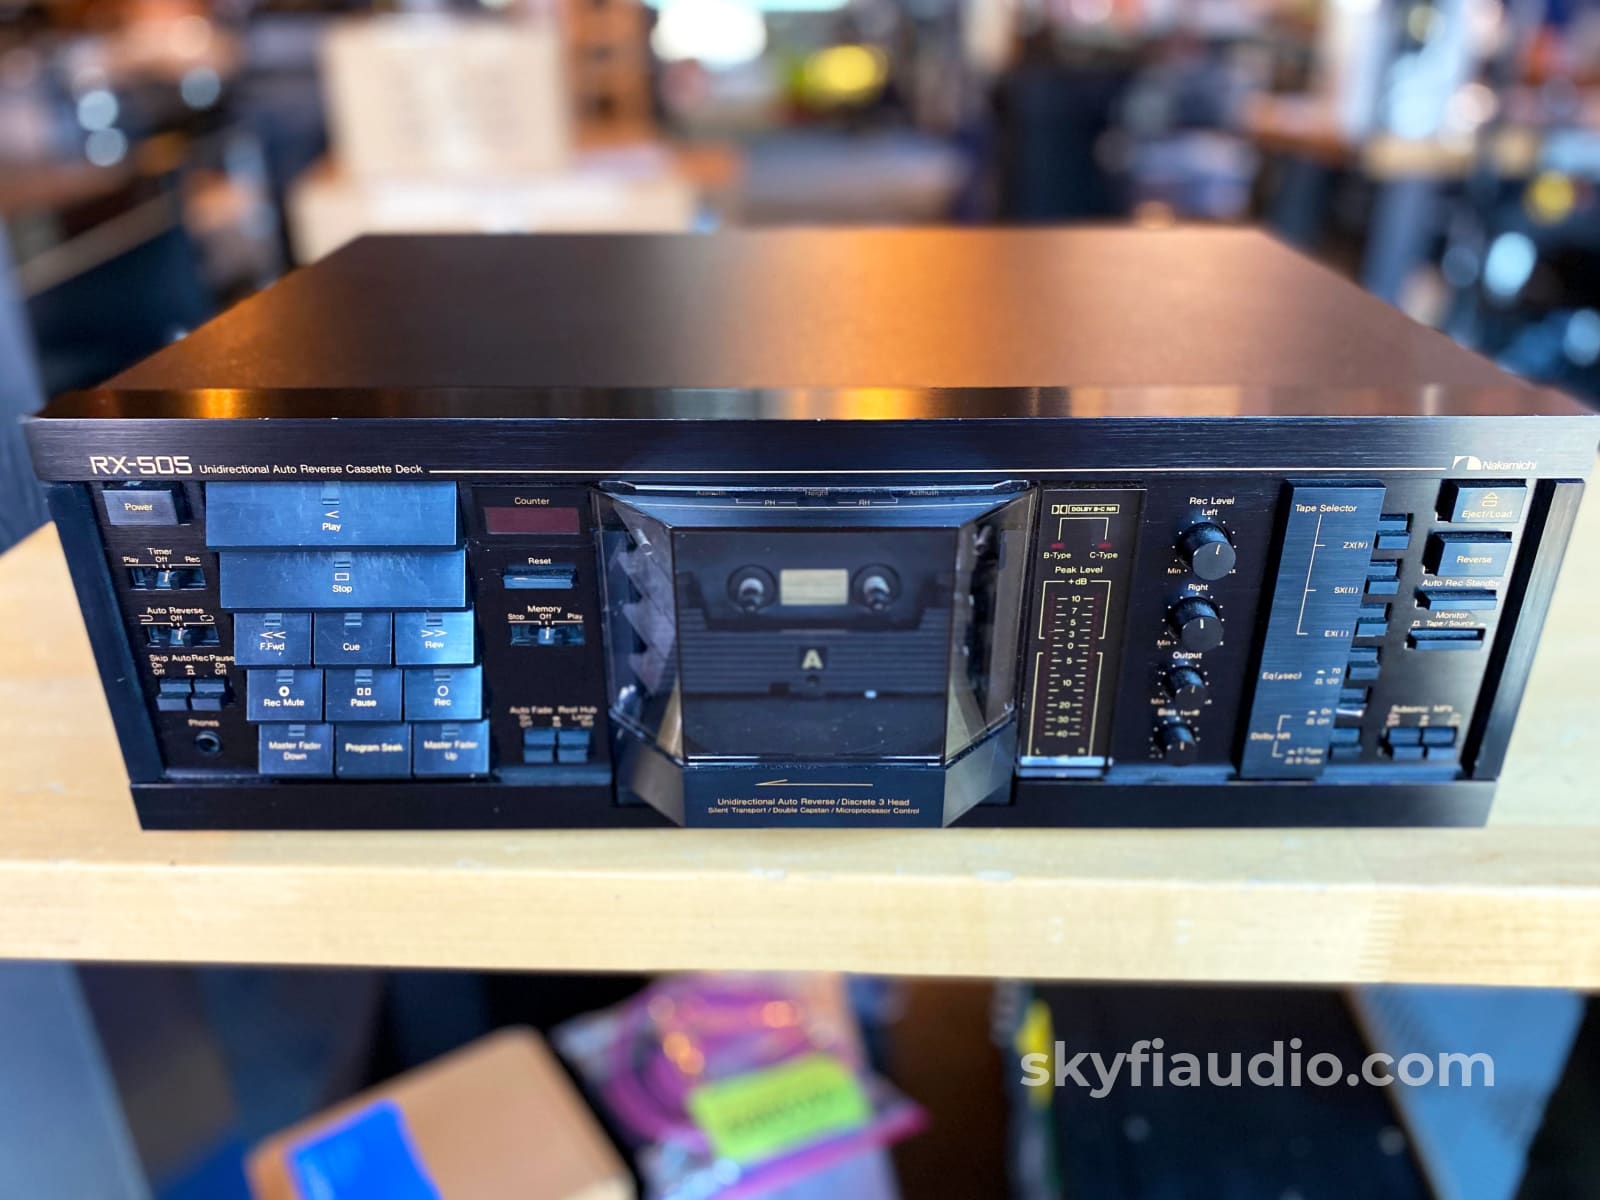 Nakamichi Rx-505 Tape Deck - 3 Heads With Unique Physical Auto Reverse Serviced